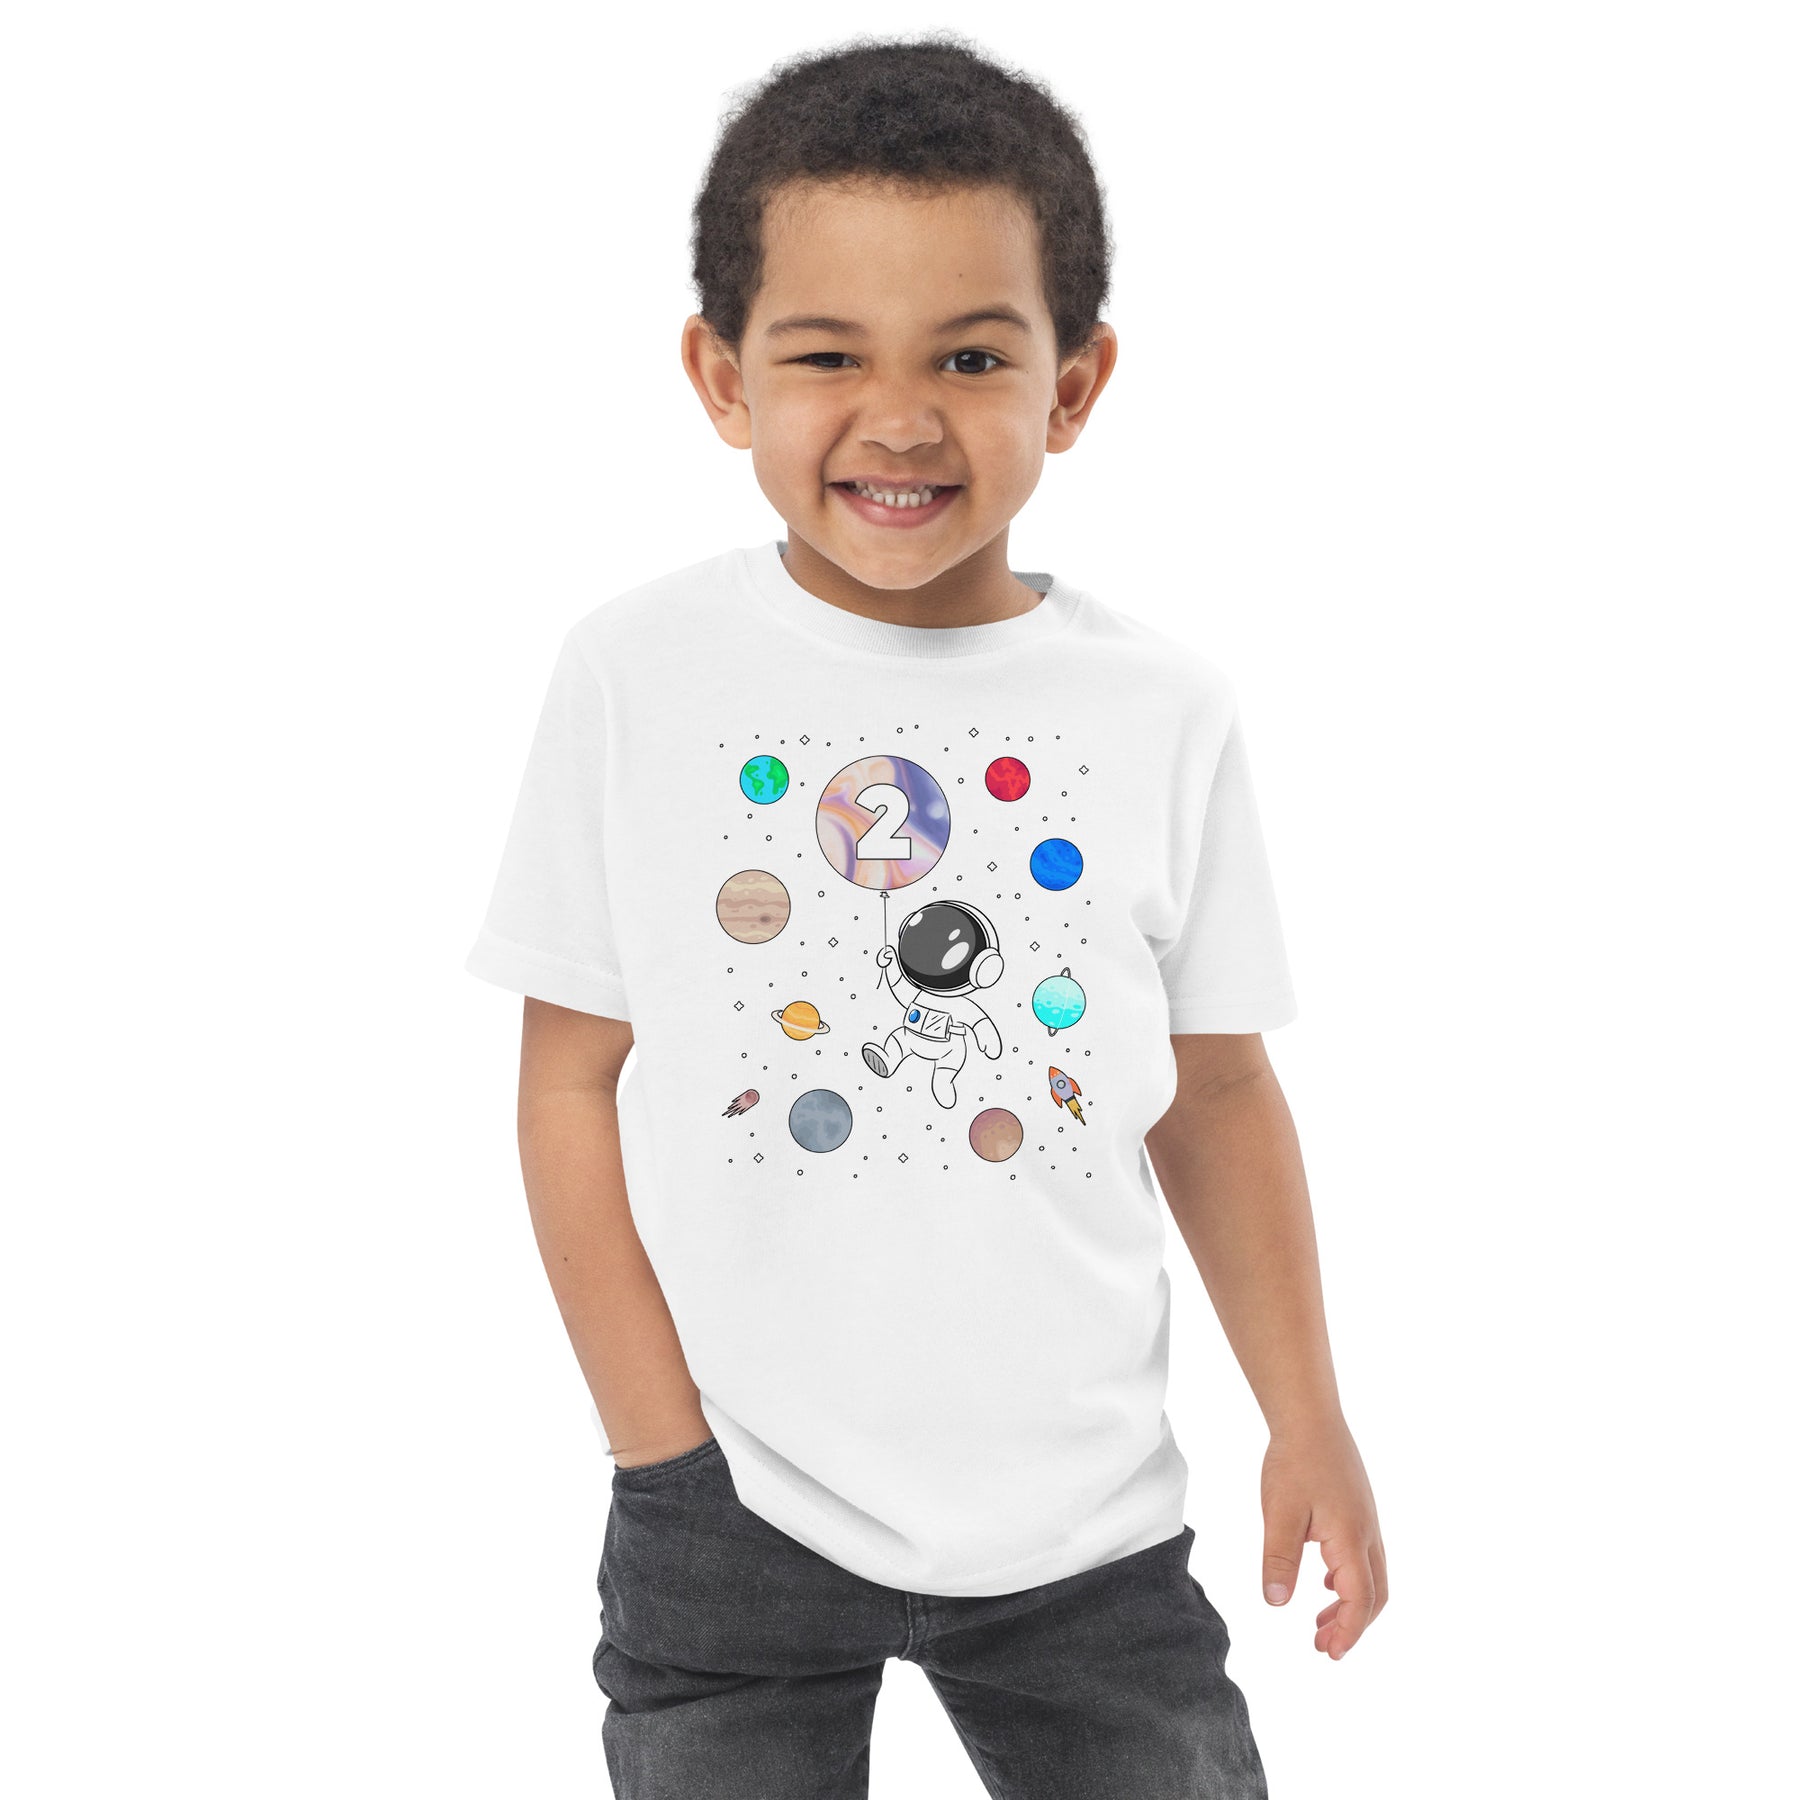 Astronaut 2nd Birthday Shirt, Two The Moon Space Themed Tee for Toddlers, Rocket and Planets Birthday Party Outfit for Two Year Olds